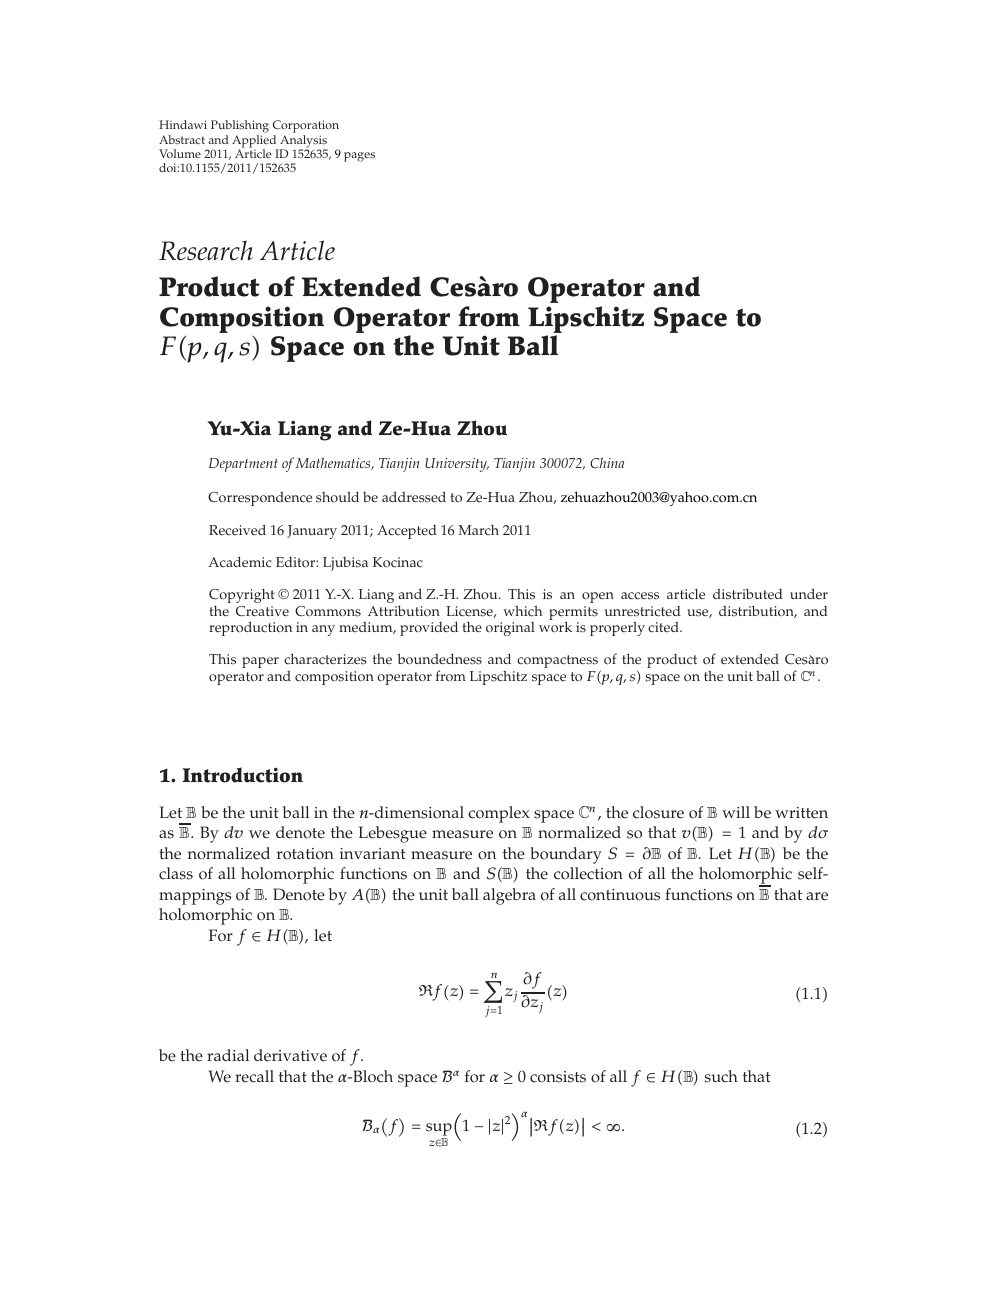 Product Of Extended Cesaro Operator And Composition Operator From Lipschitz Space To F P Q S Space On The Unit Ball Topic Of Research Paper In Mathematics